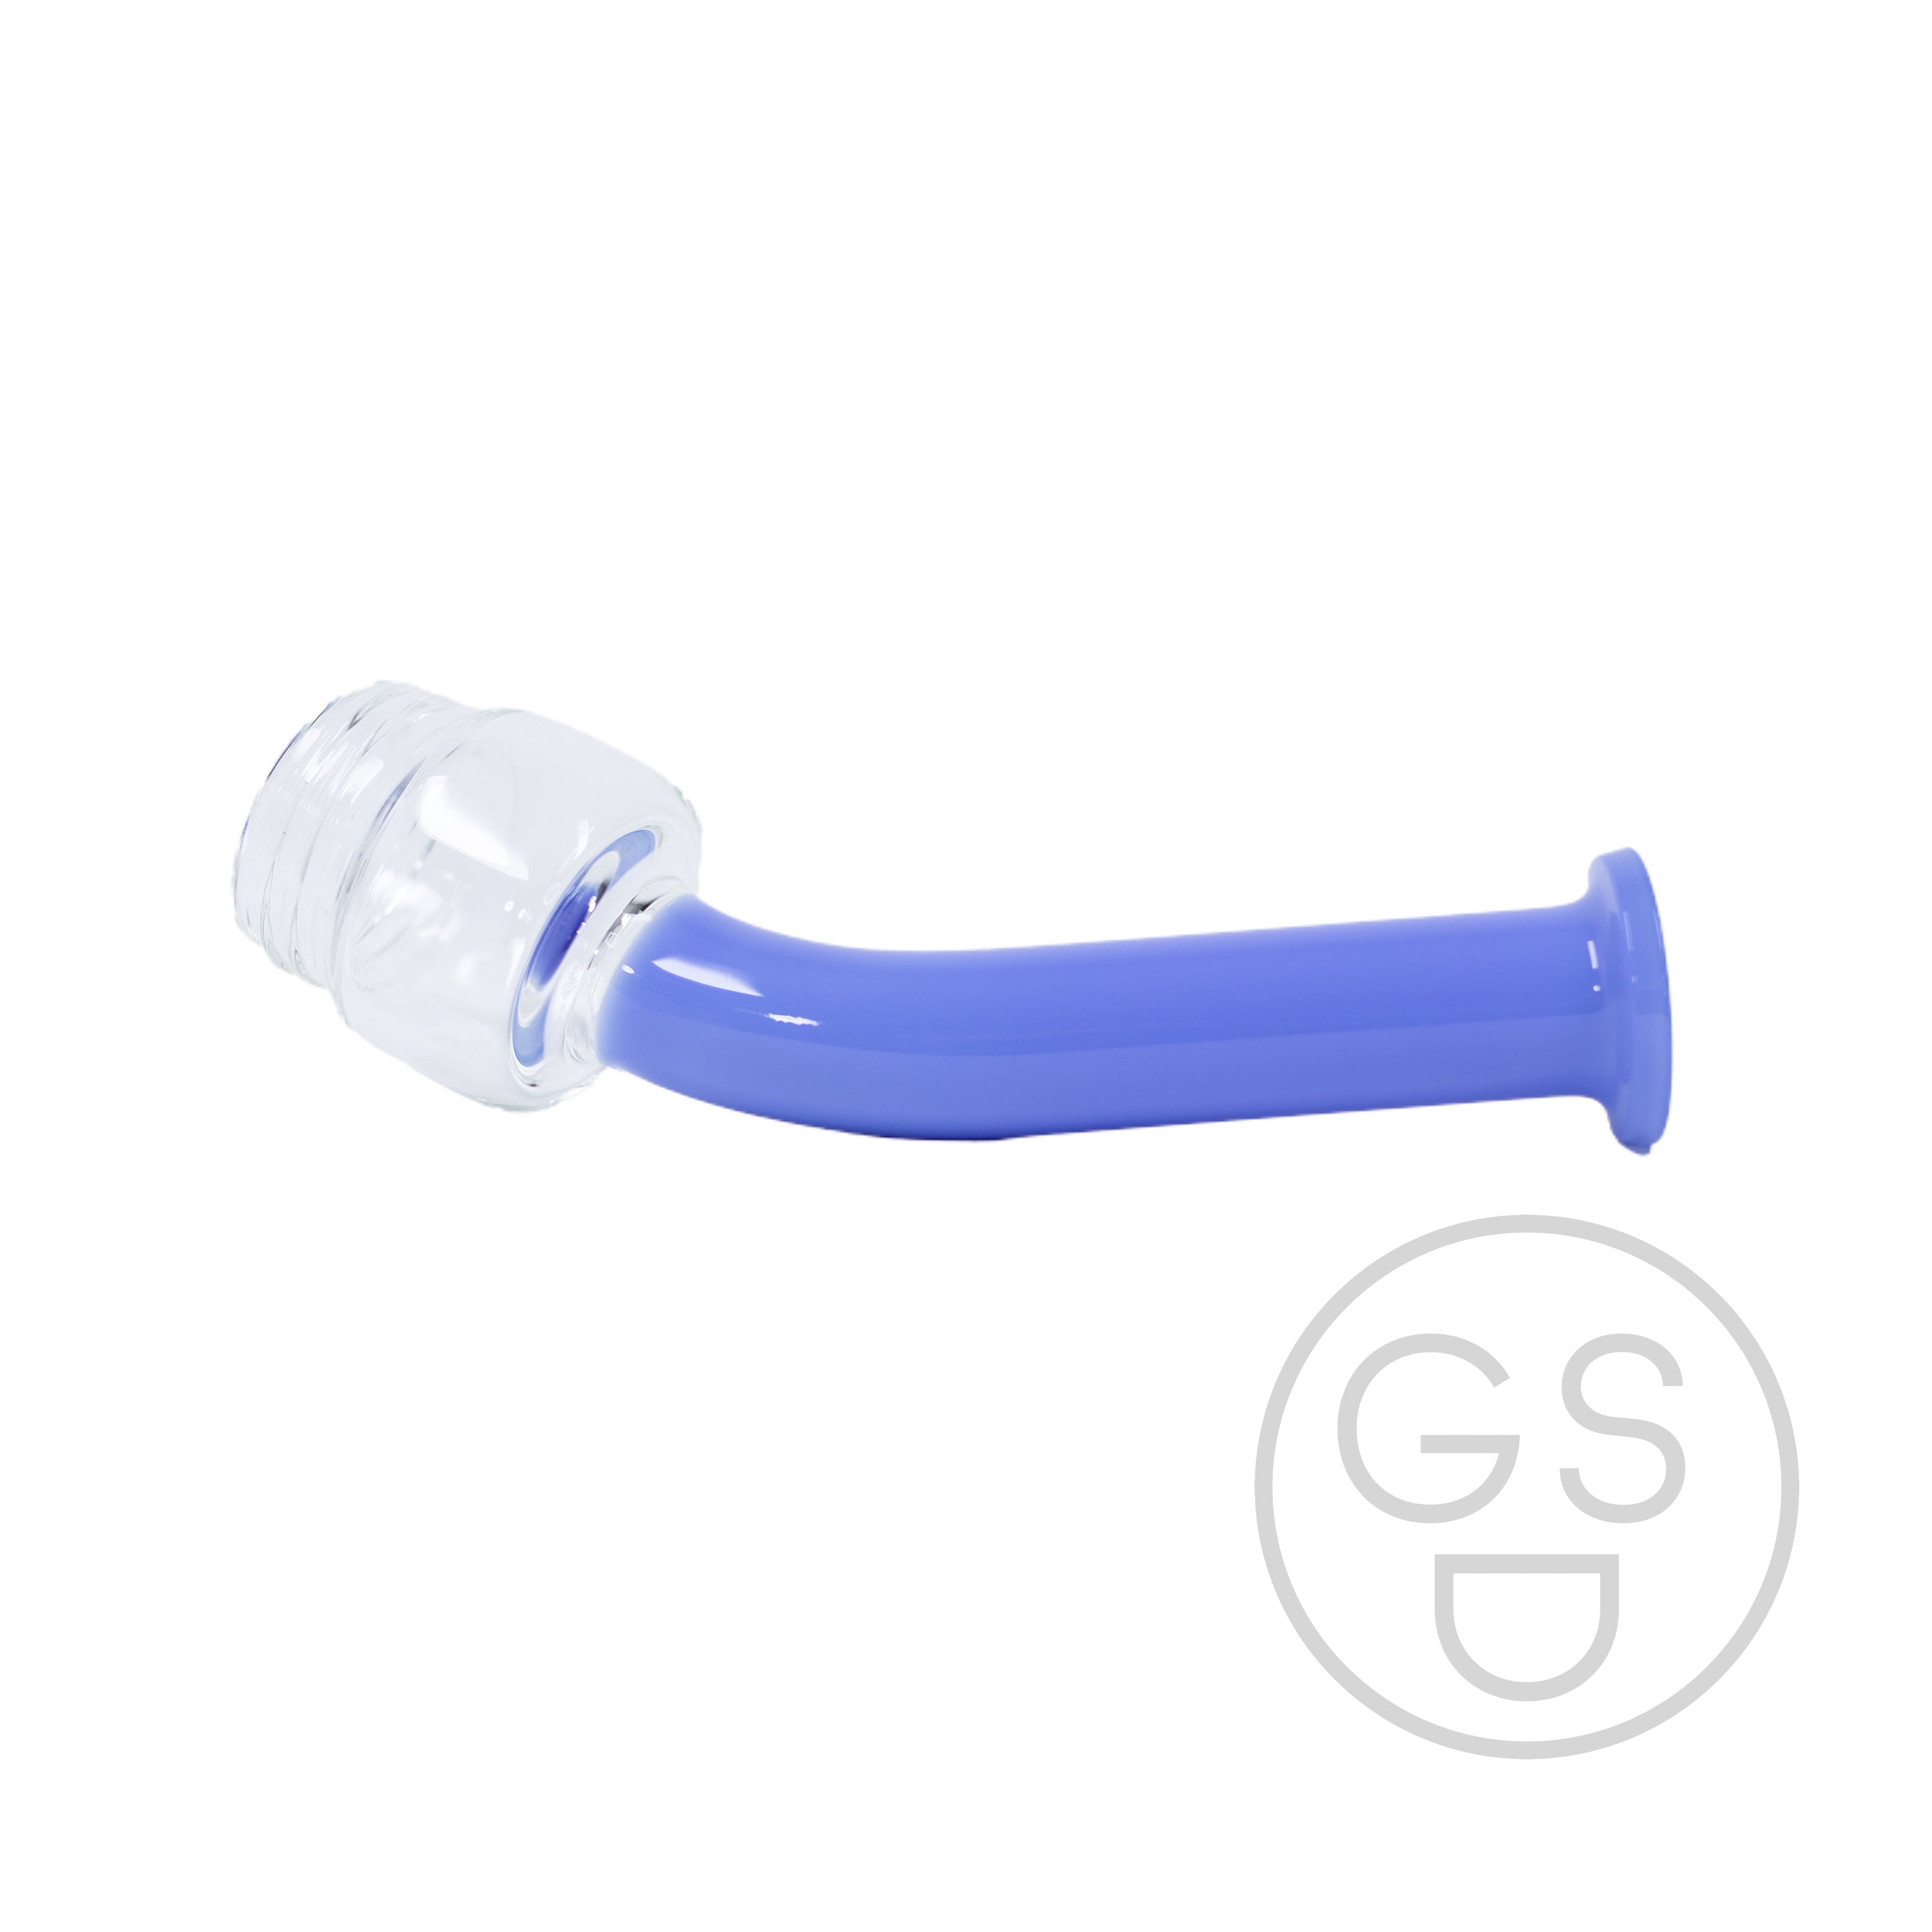 Prism Modular Waterpipe Bent Mouthpiece - Blueberry